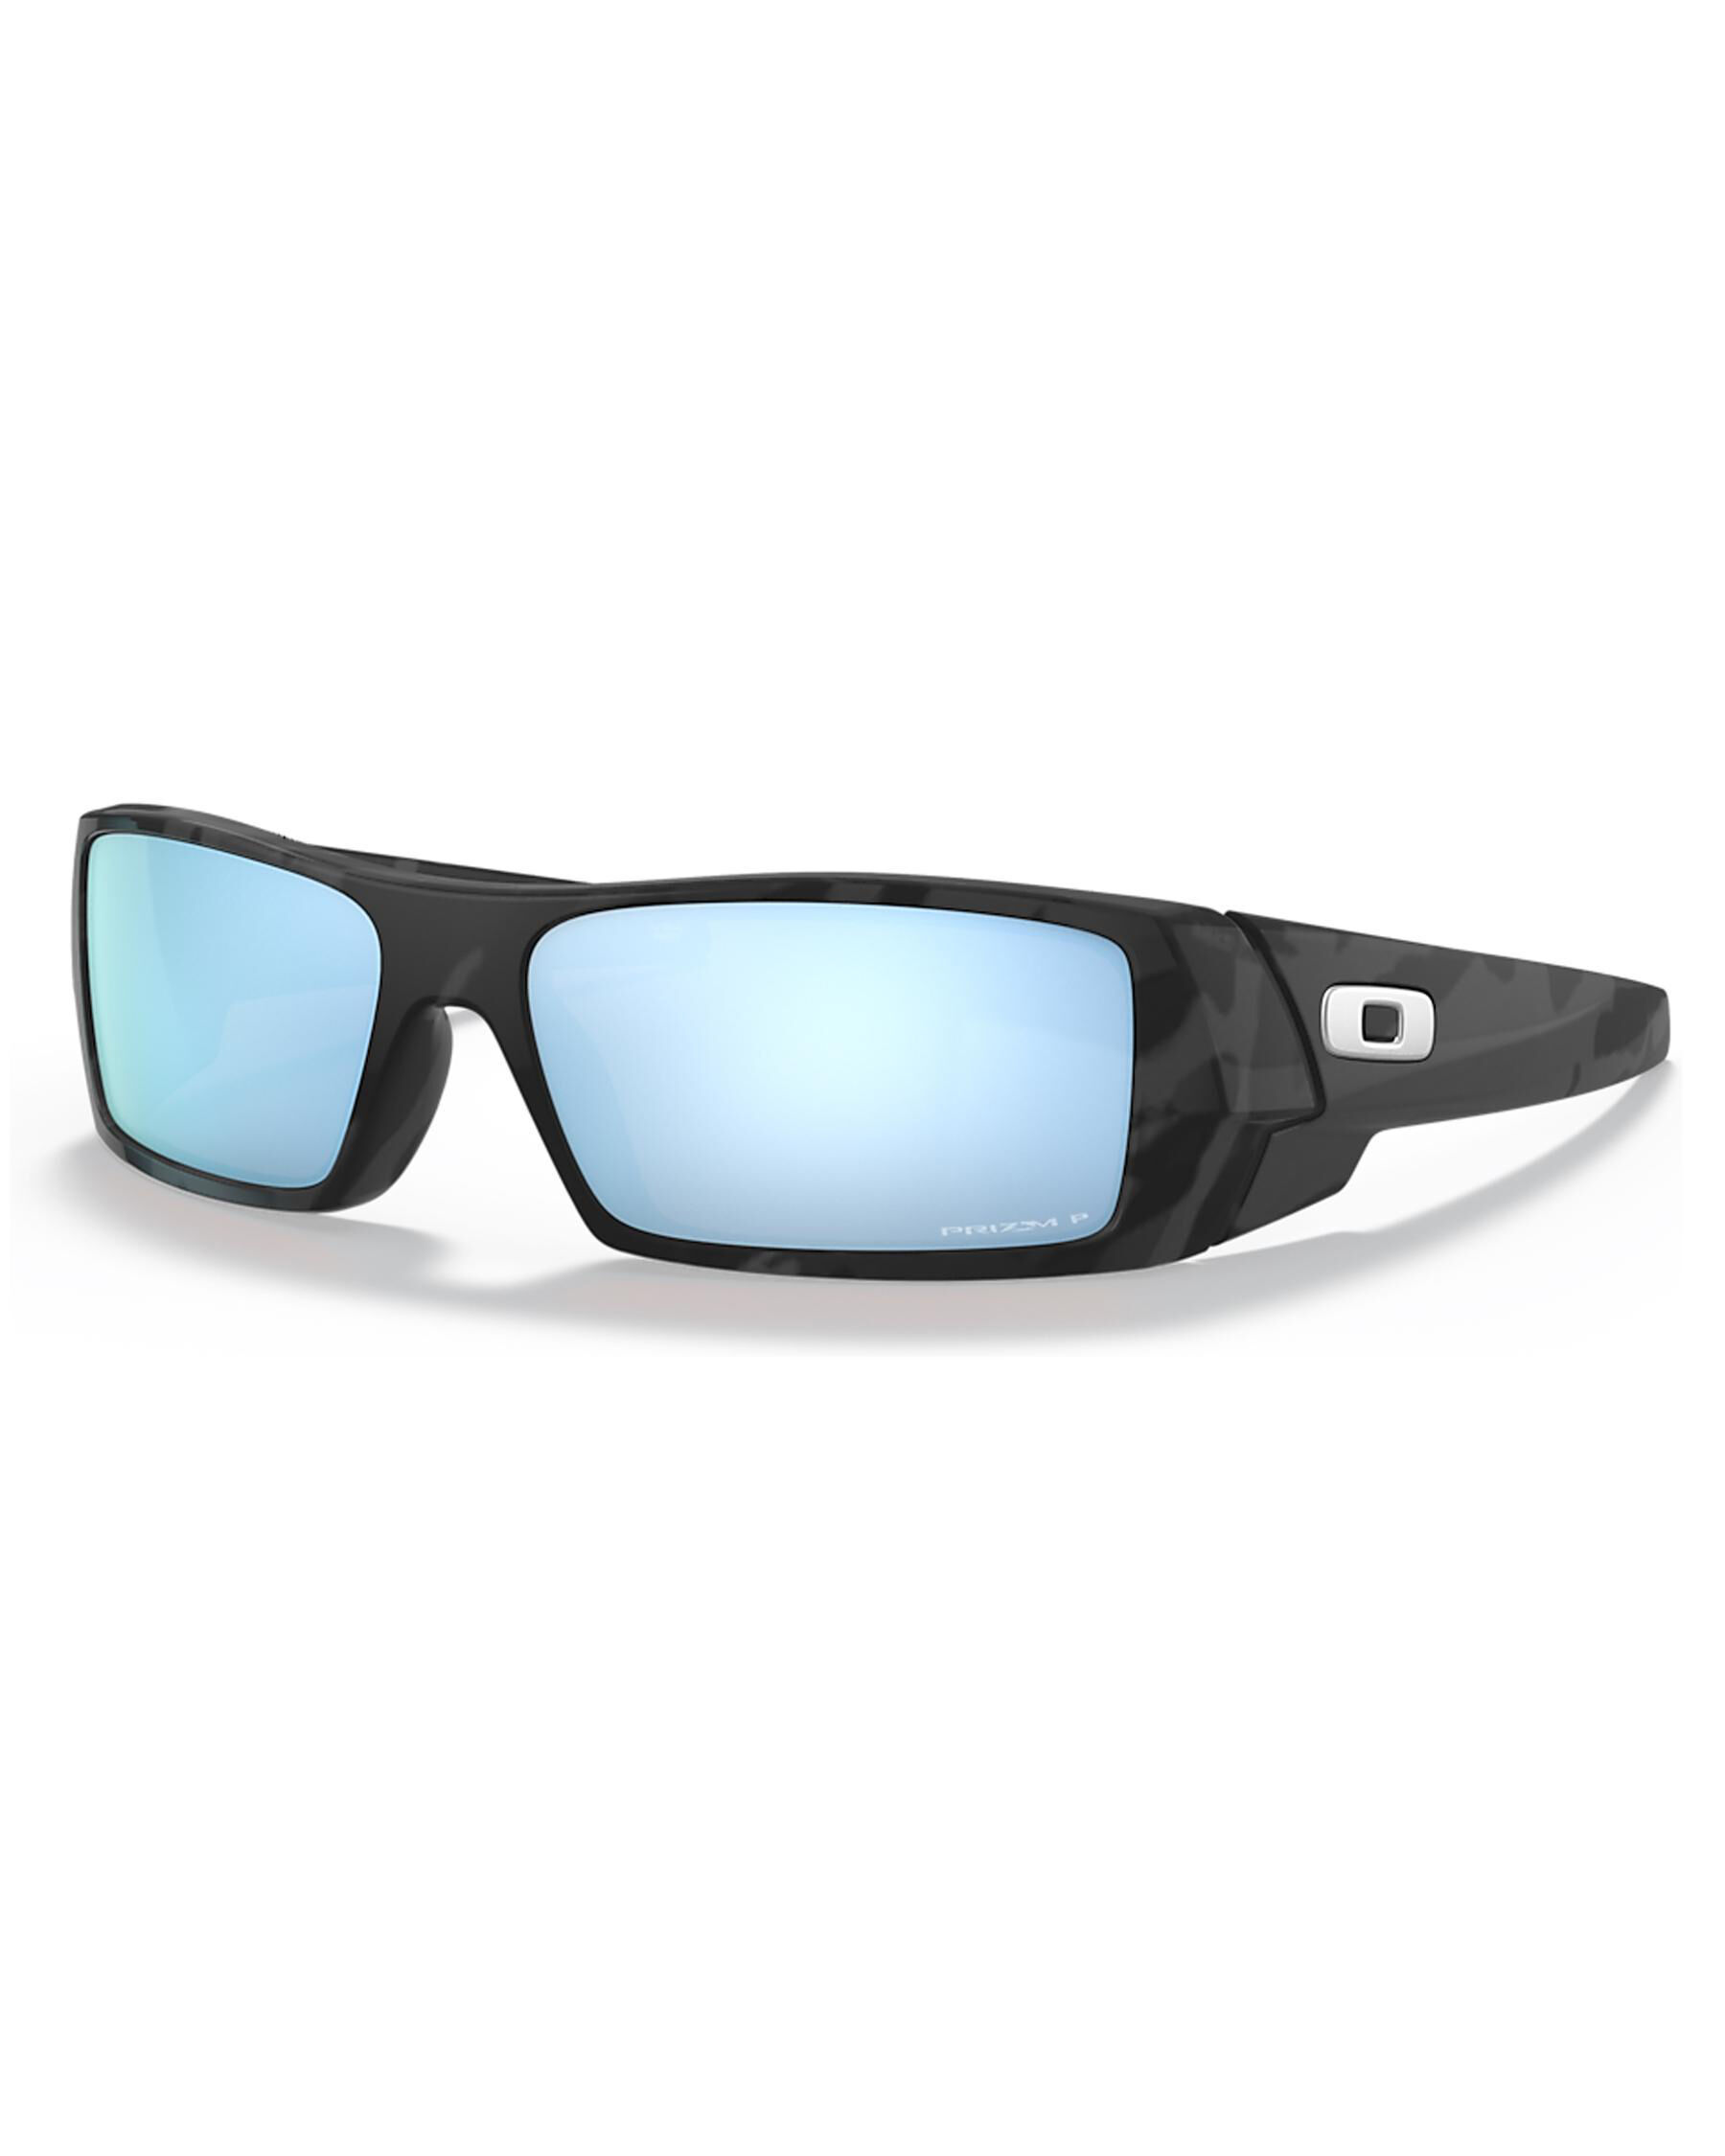 Sunglasses Oakley OO9014 GASCAN col. 03-471 700285034713 Frame Color Black  : Buy online with cheapest price Vistaexpert